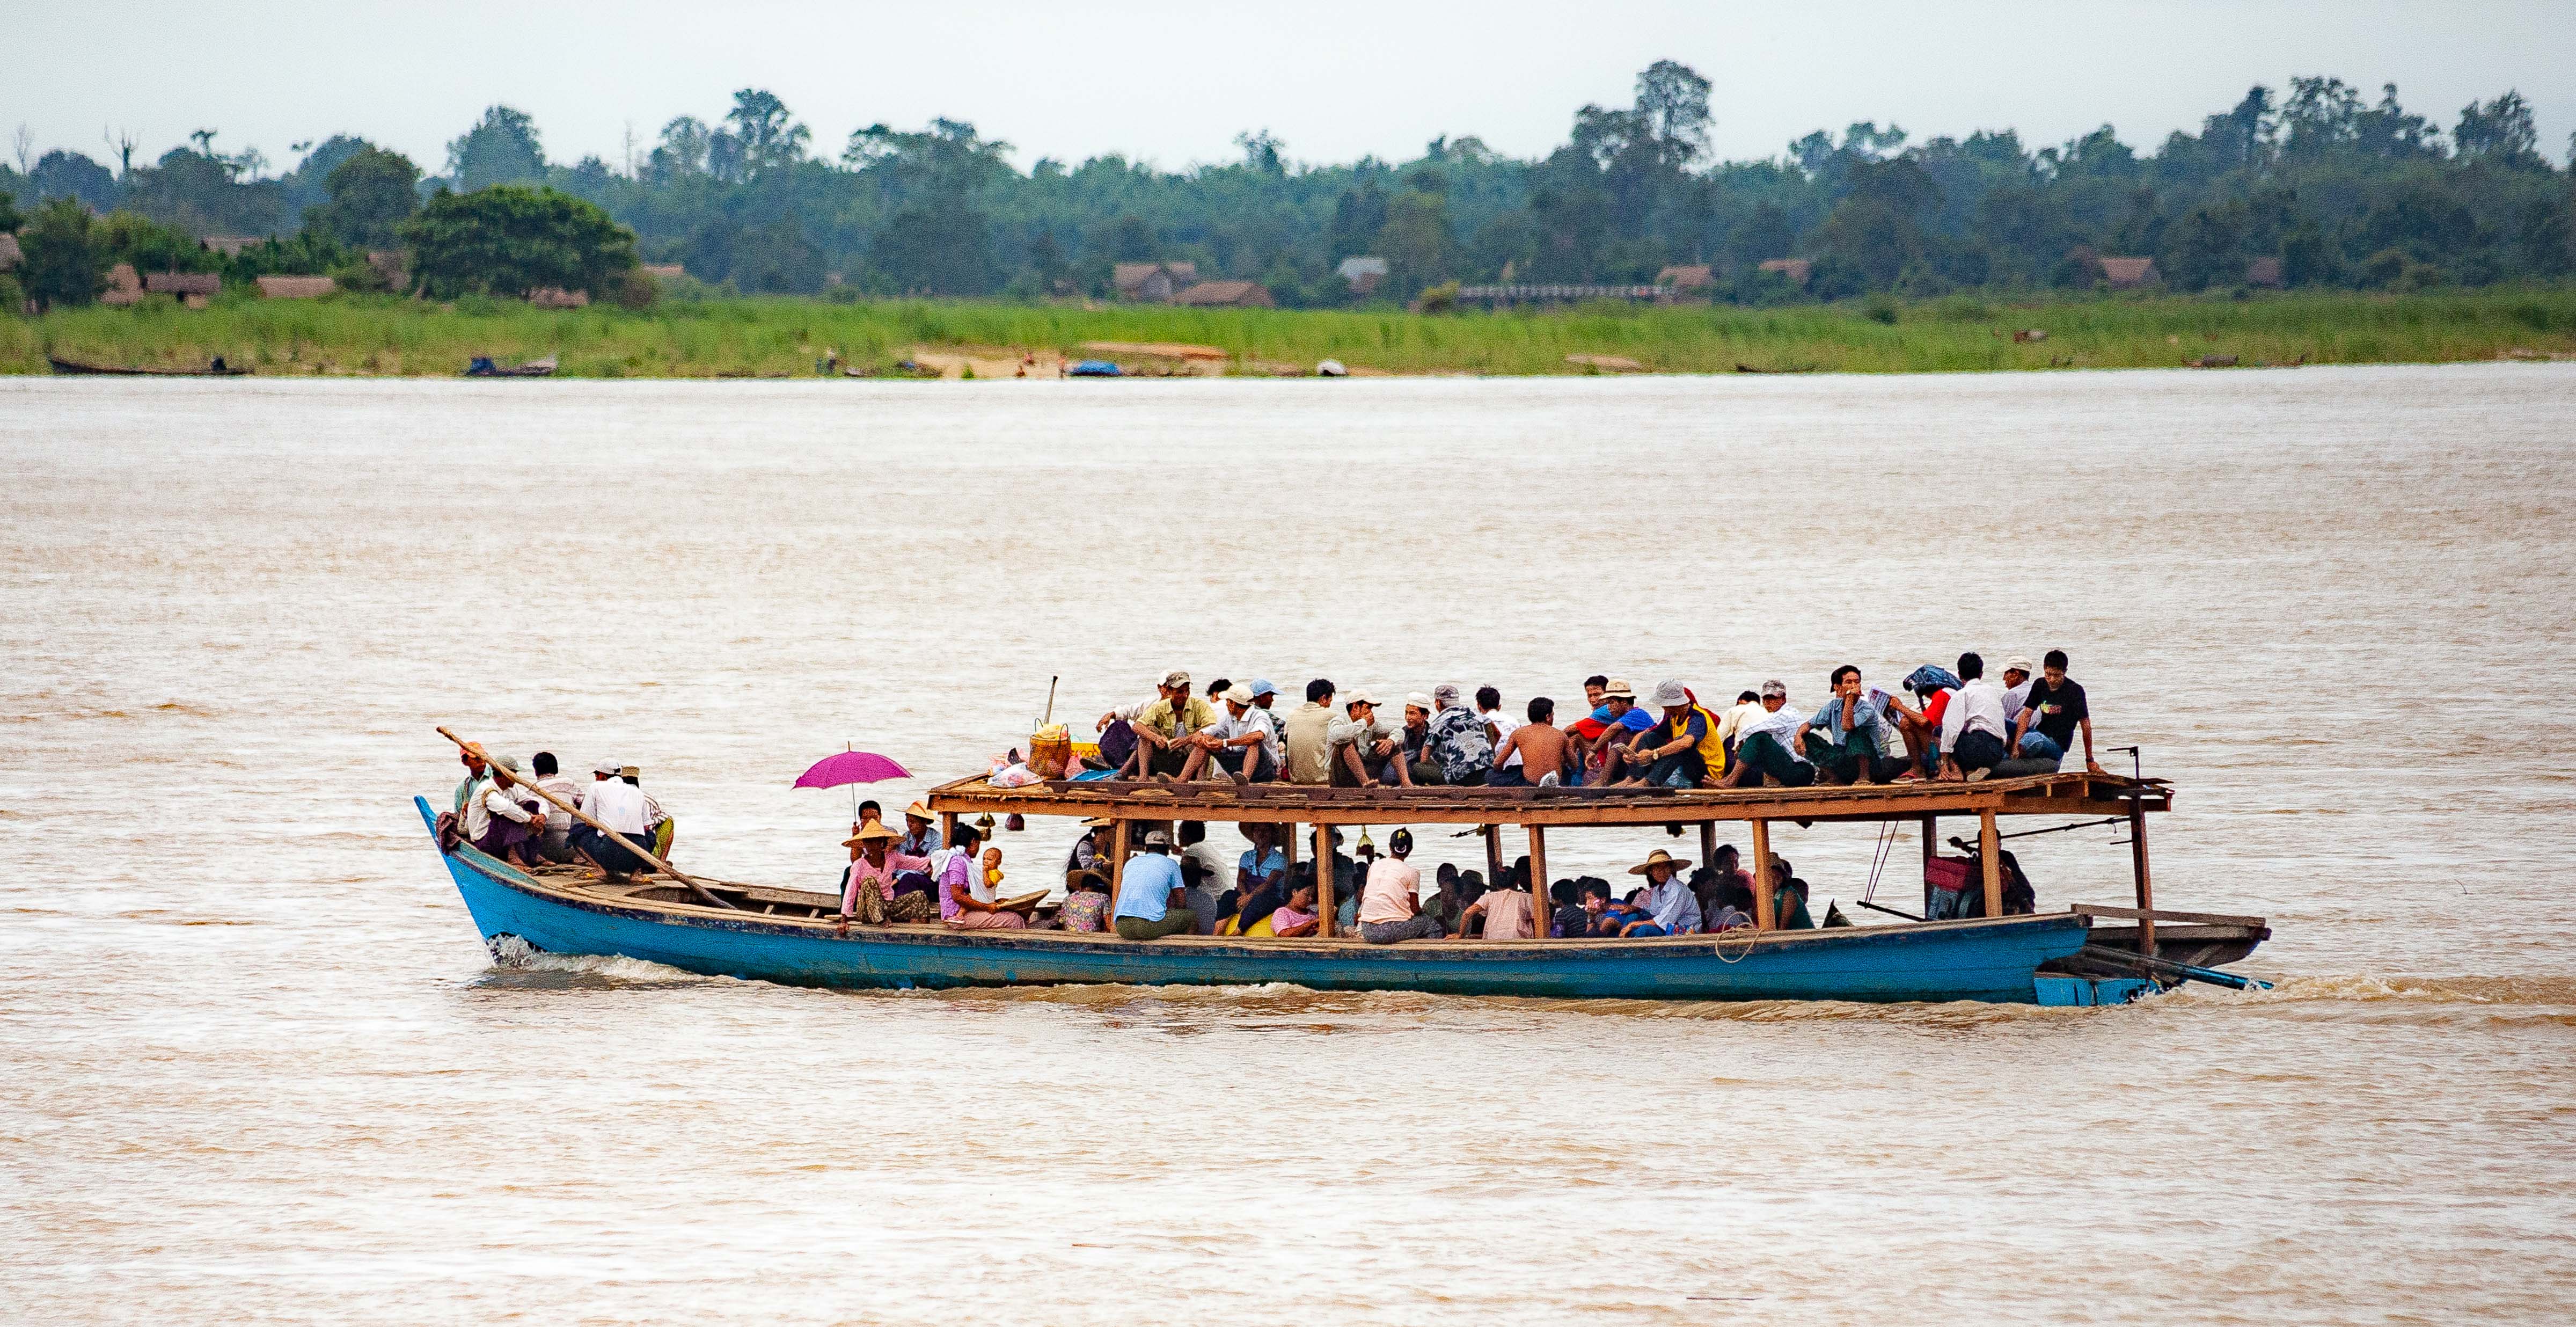 Myanmar, Unknown Prov, Packed Boat, 2009, IMG 3722